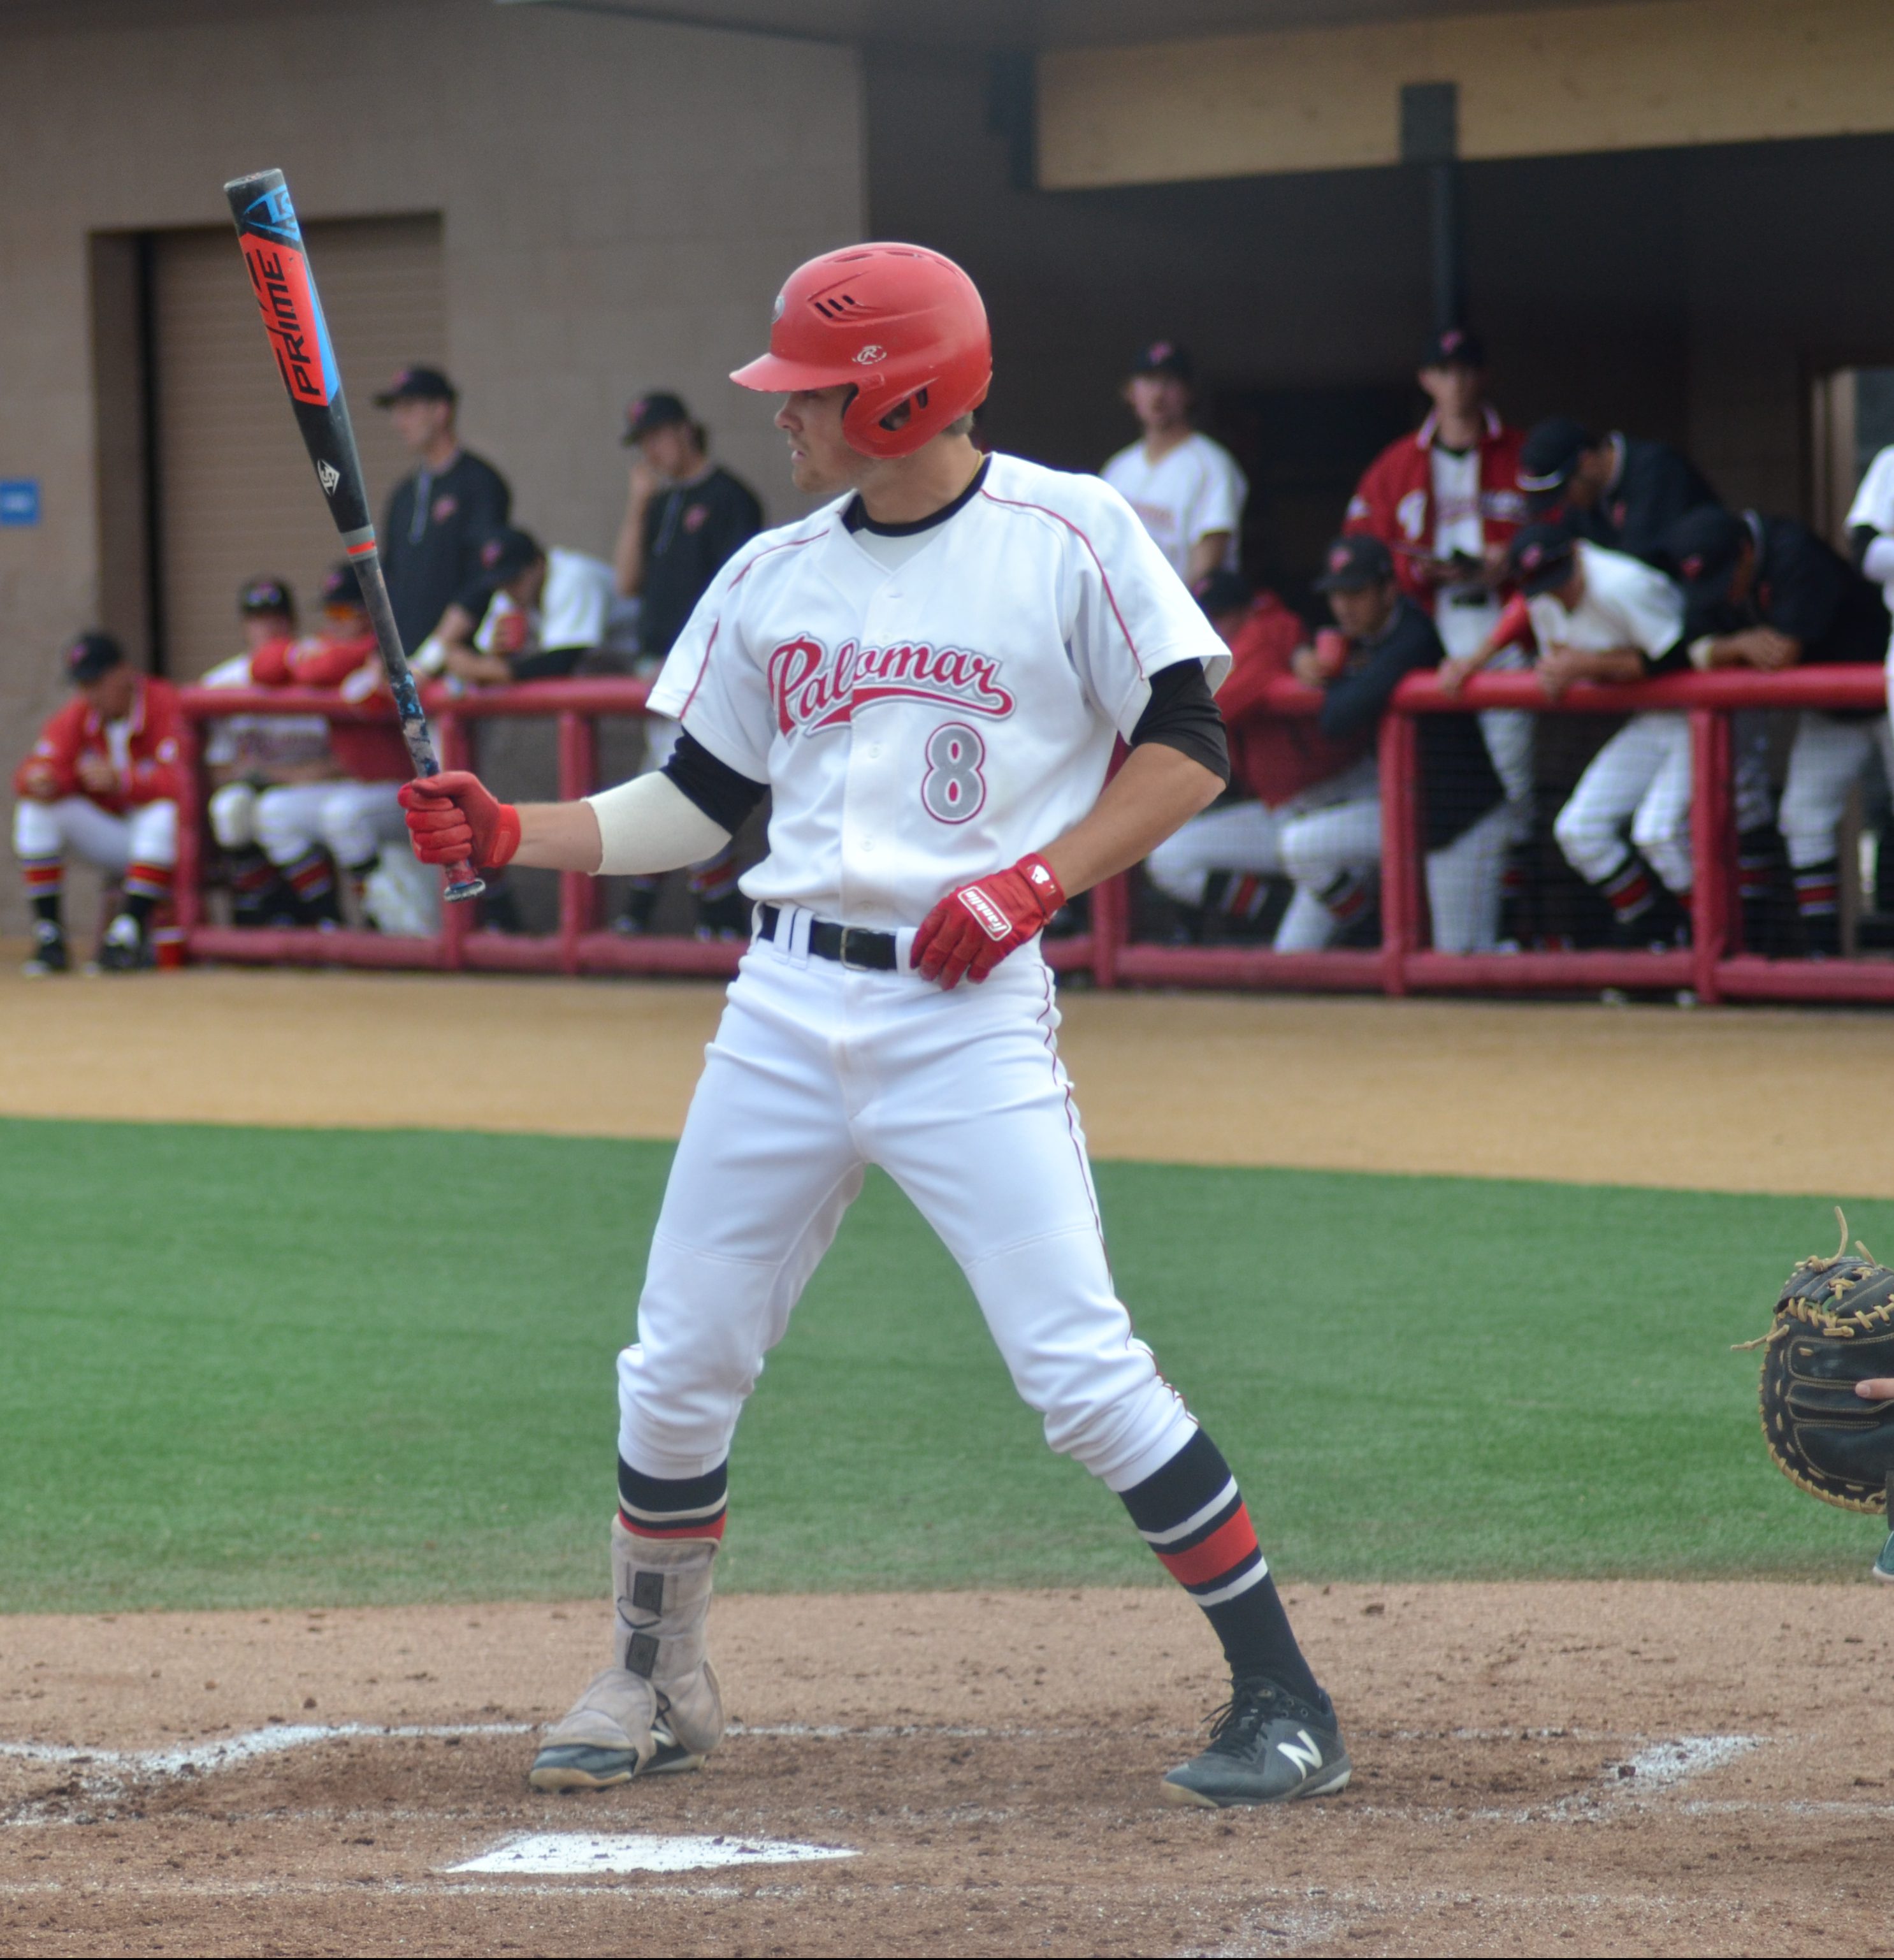 Third basemen Justin Folz batting in the Comets 4-3 loss to Grossmont on Feb. 26, 2019. (Krista Moore/The Telescope)